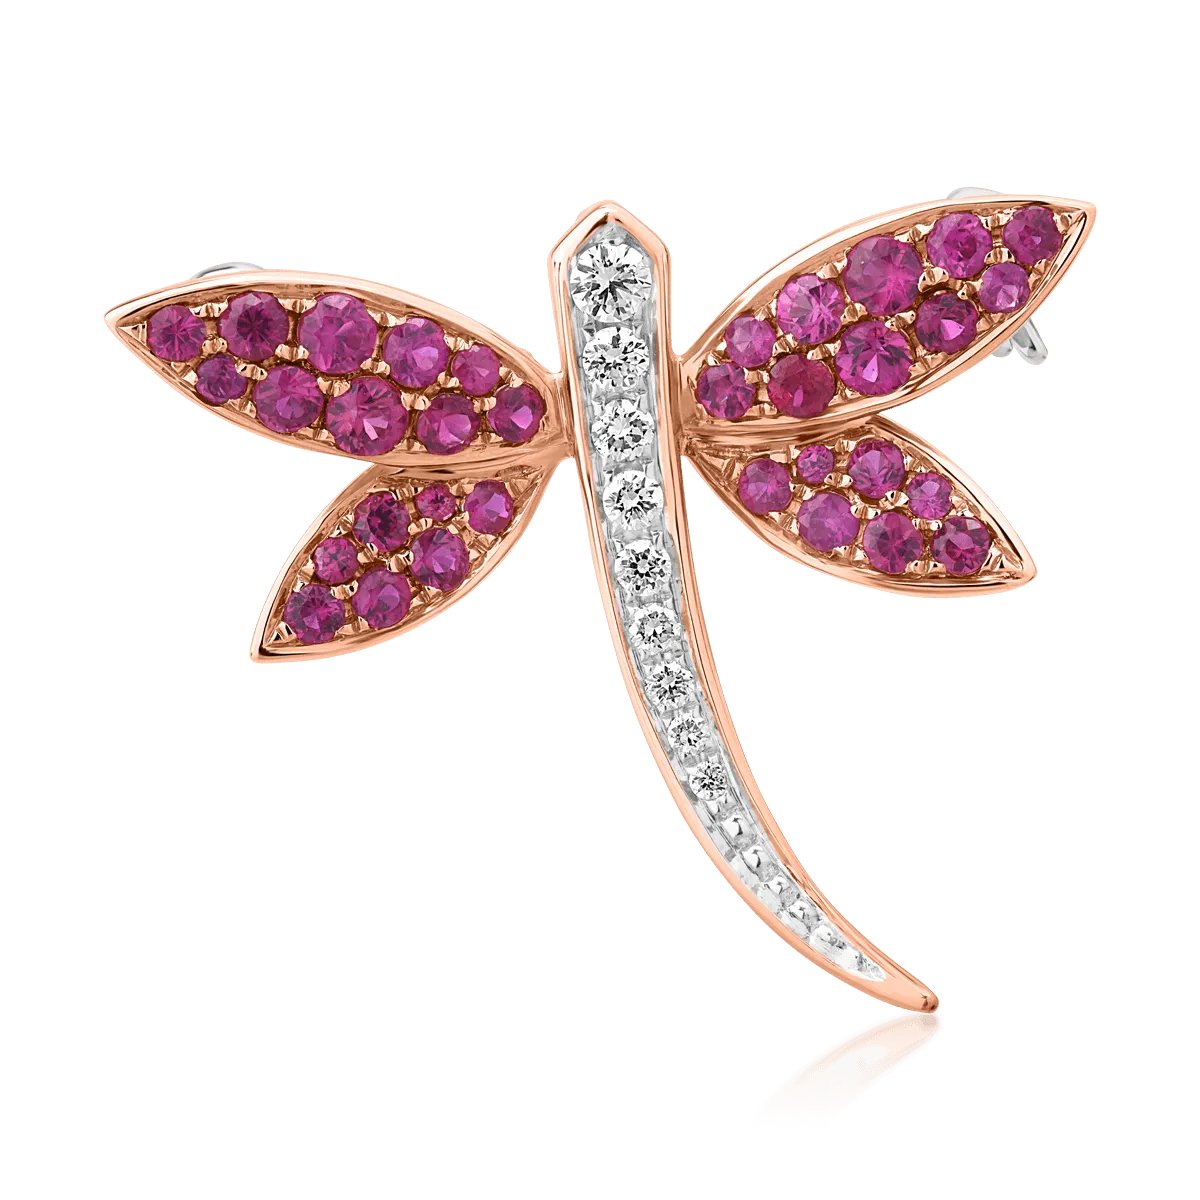 18K white-rose gold brooch with 0.67ct rubies and 0.11ct diamonds